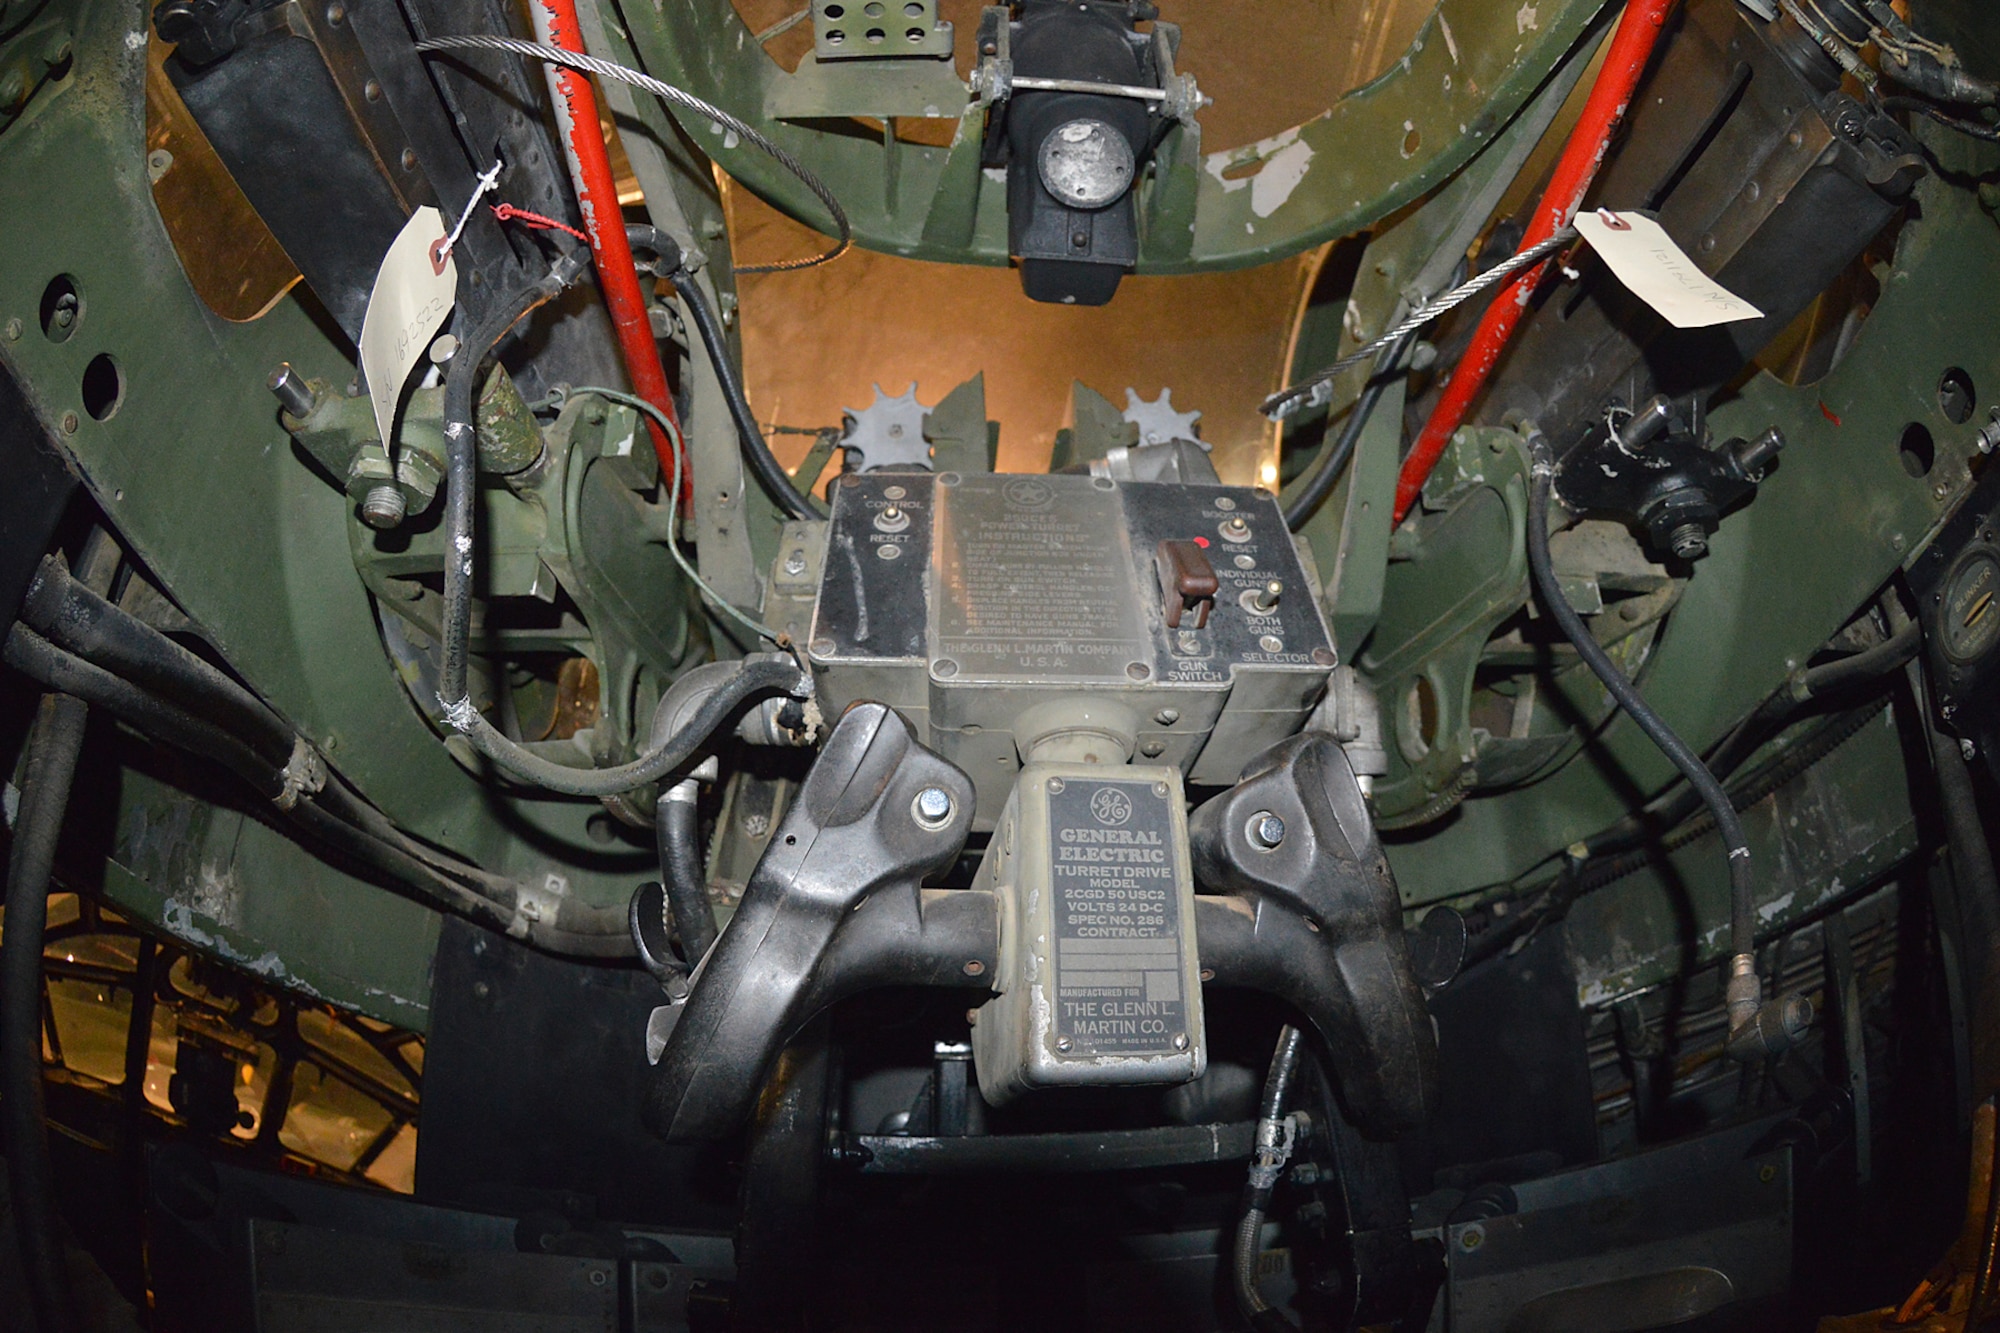 DAYTON, Ohio - Consolidated B-24D top turret position at the National Museum of the U.S. Air Force. (U.S. Air Force photo)
